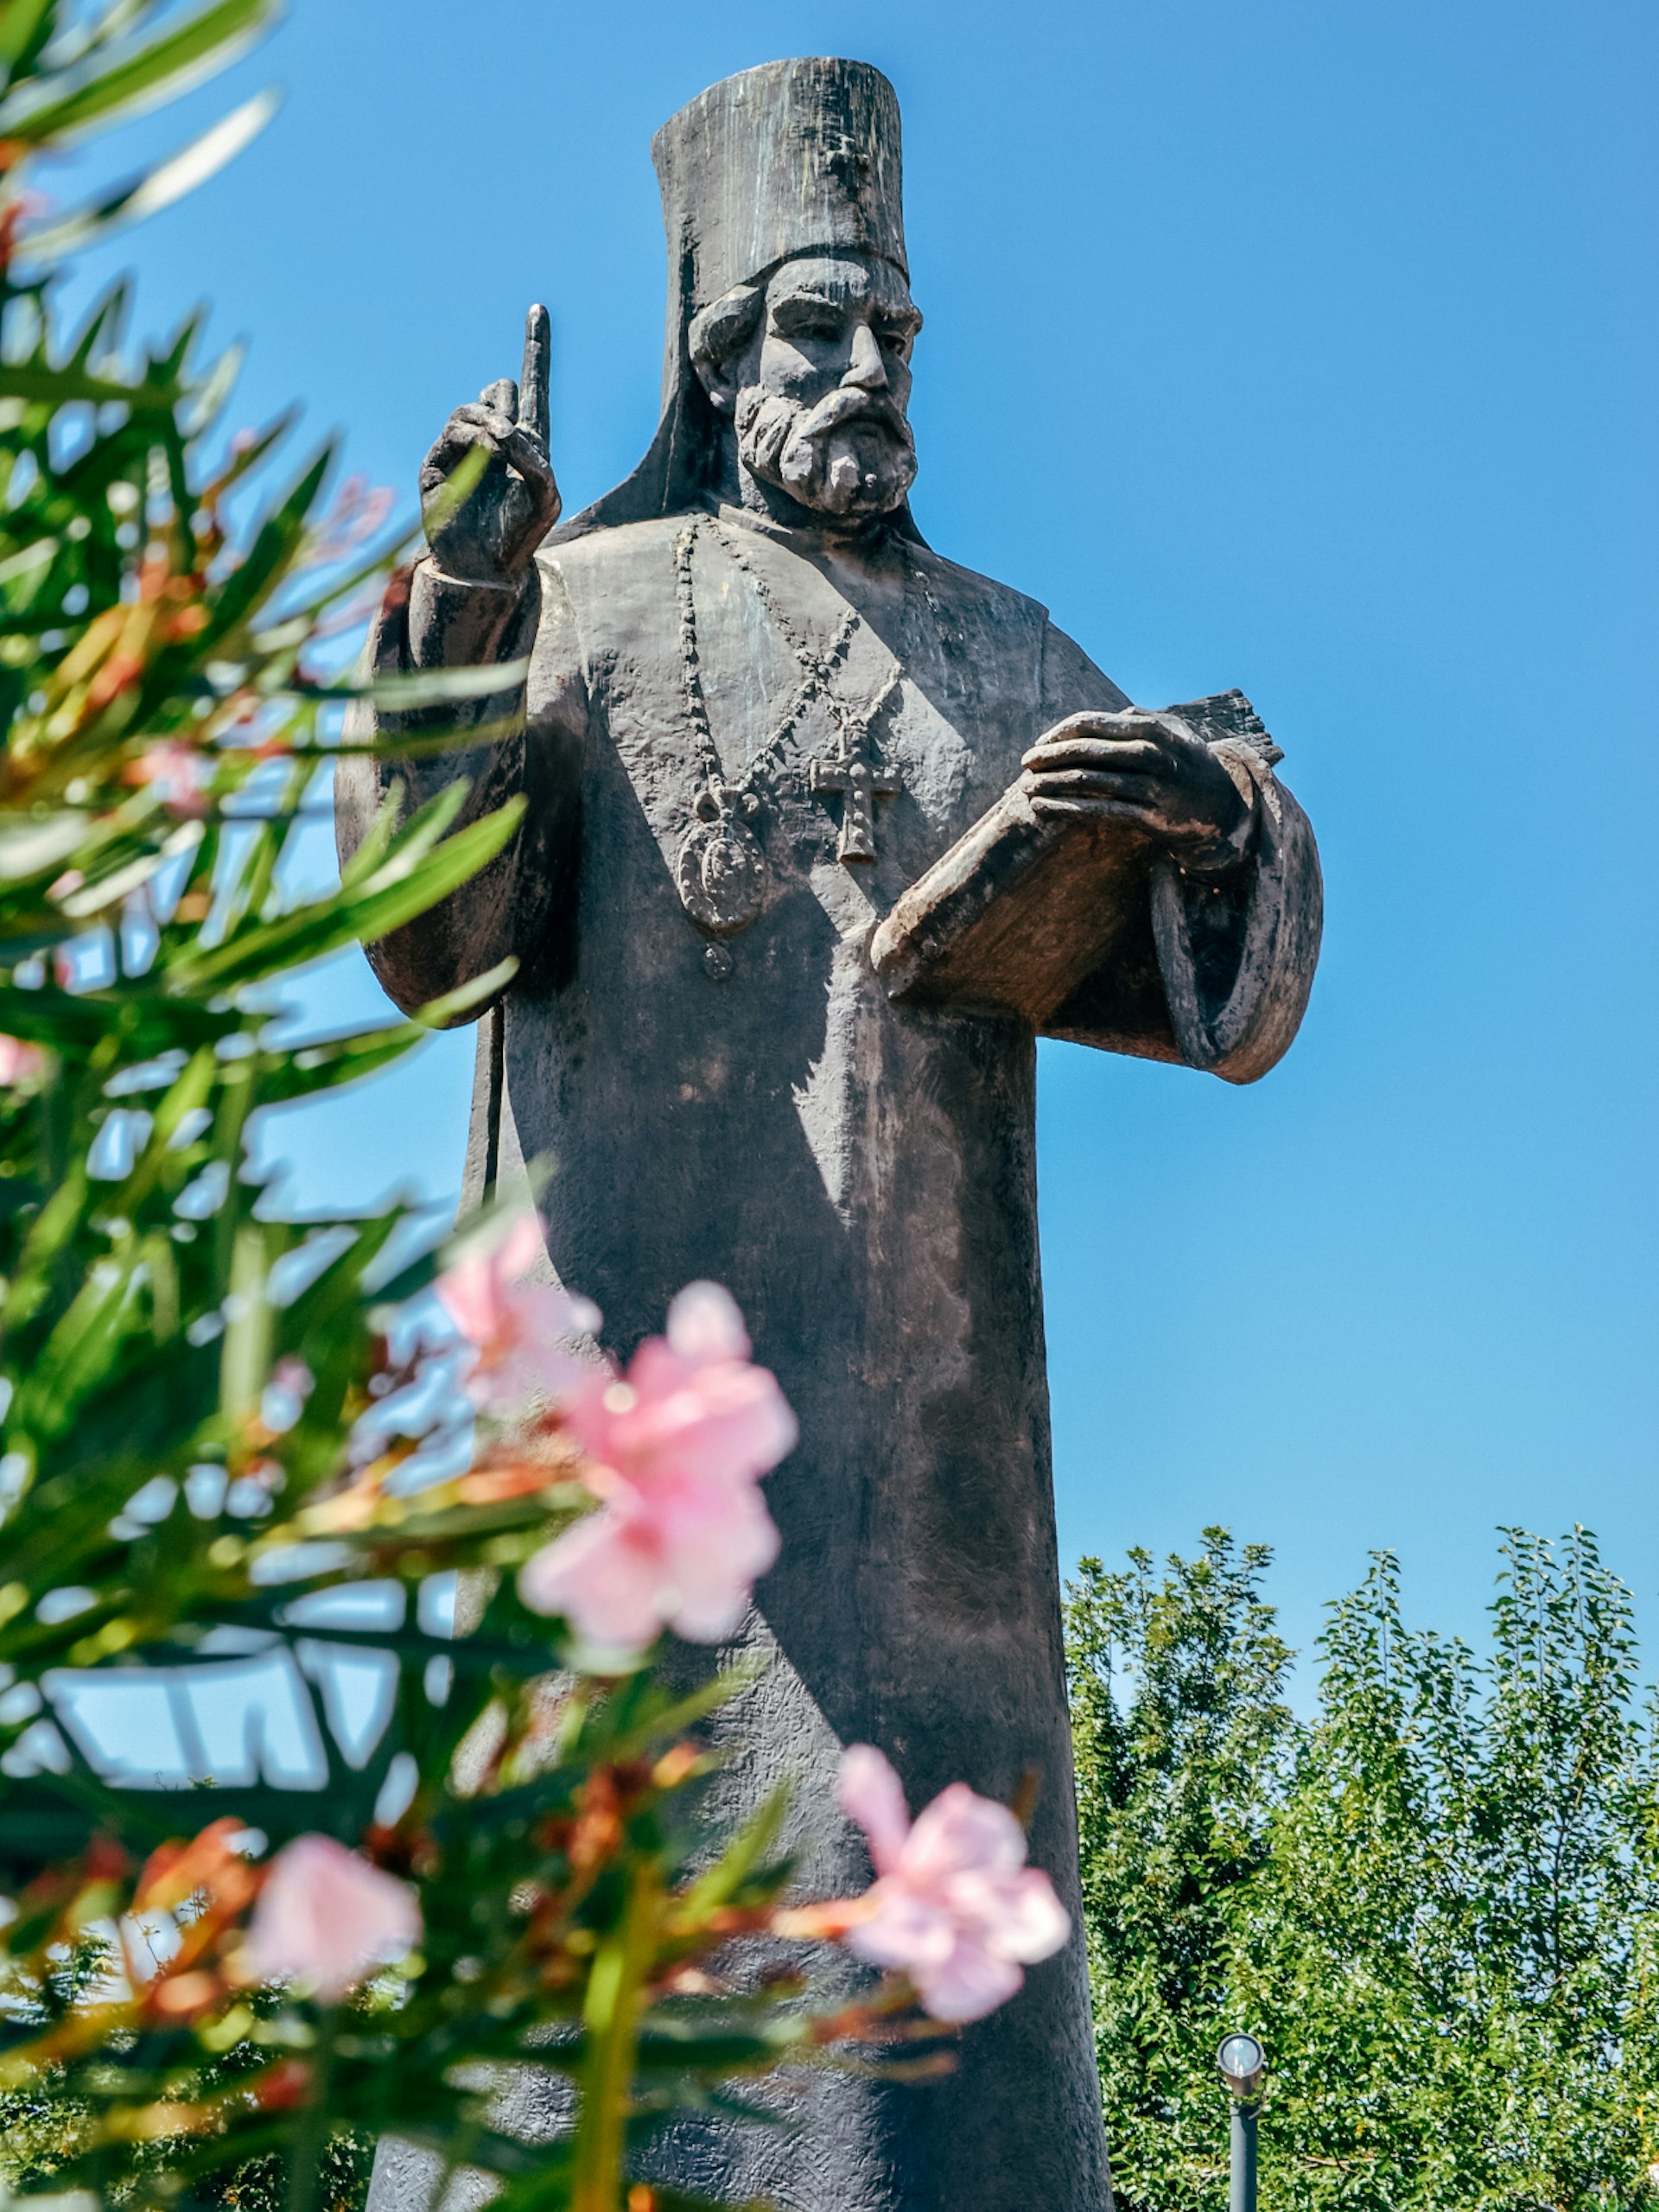 The St Peter of Cetinje monument in University Park © Mateone / Shutterstock